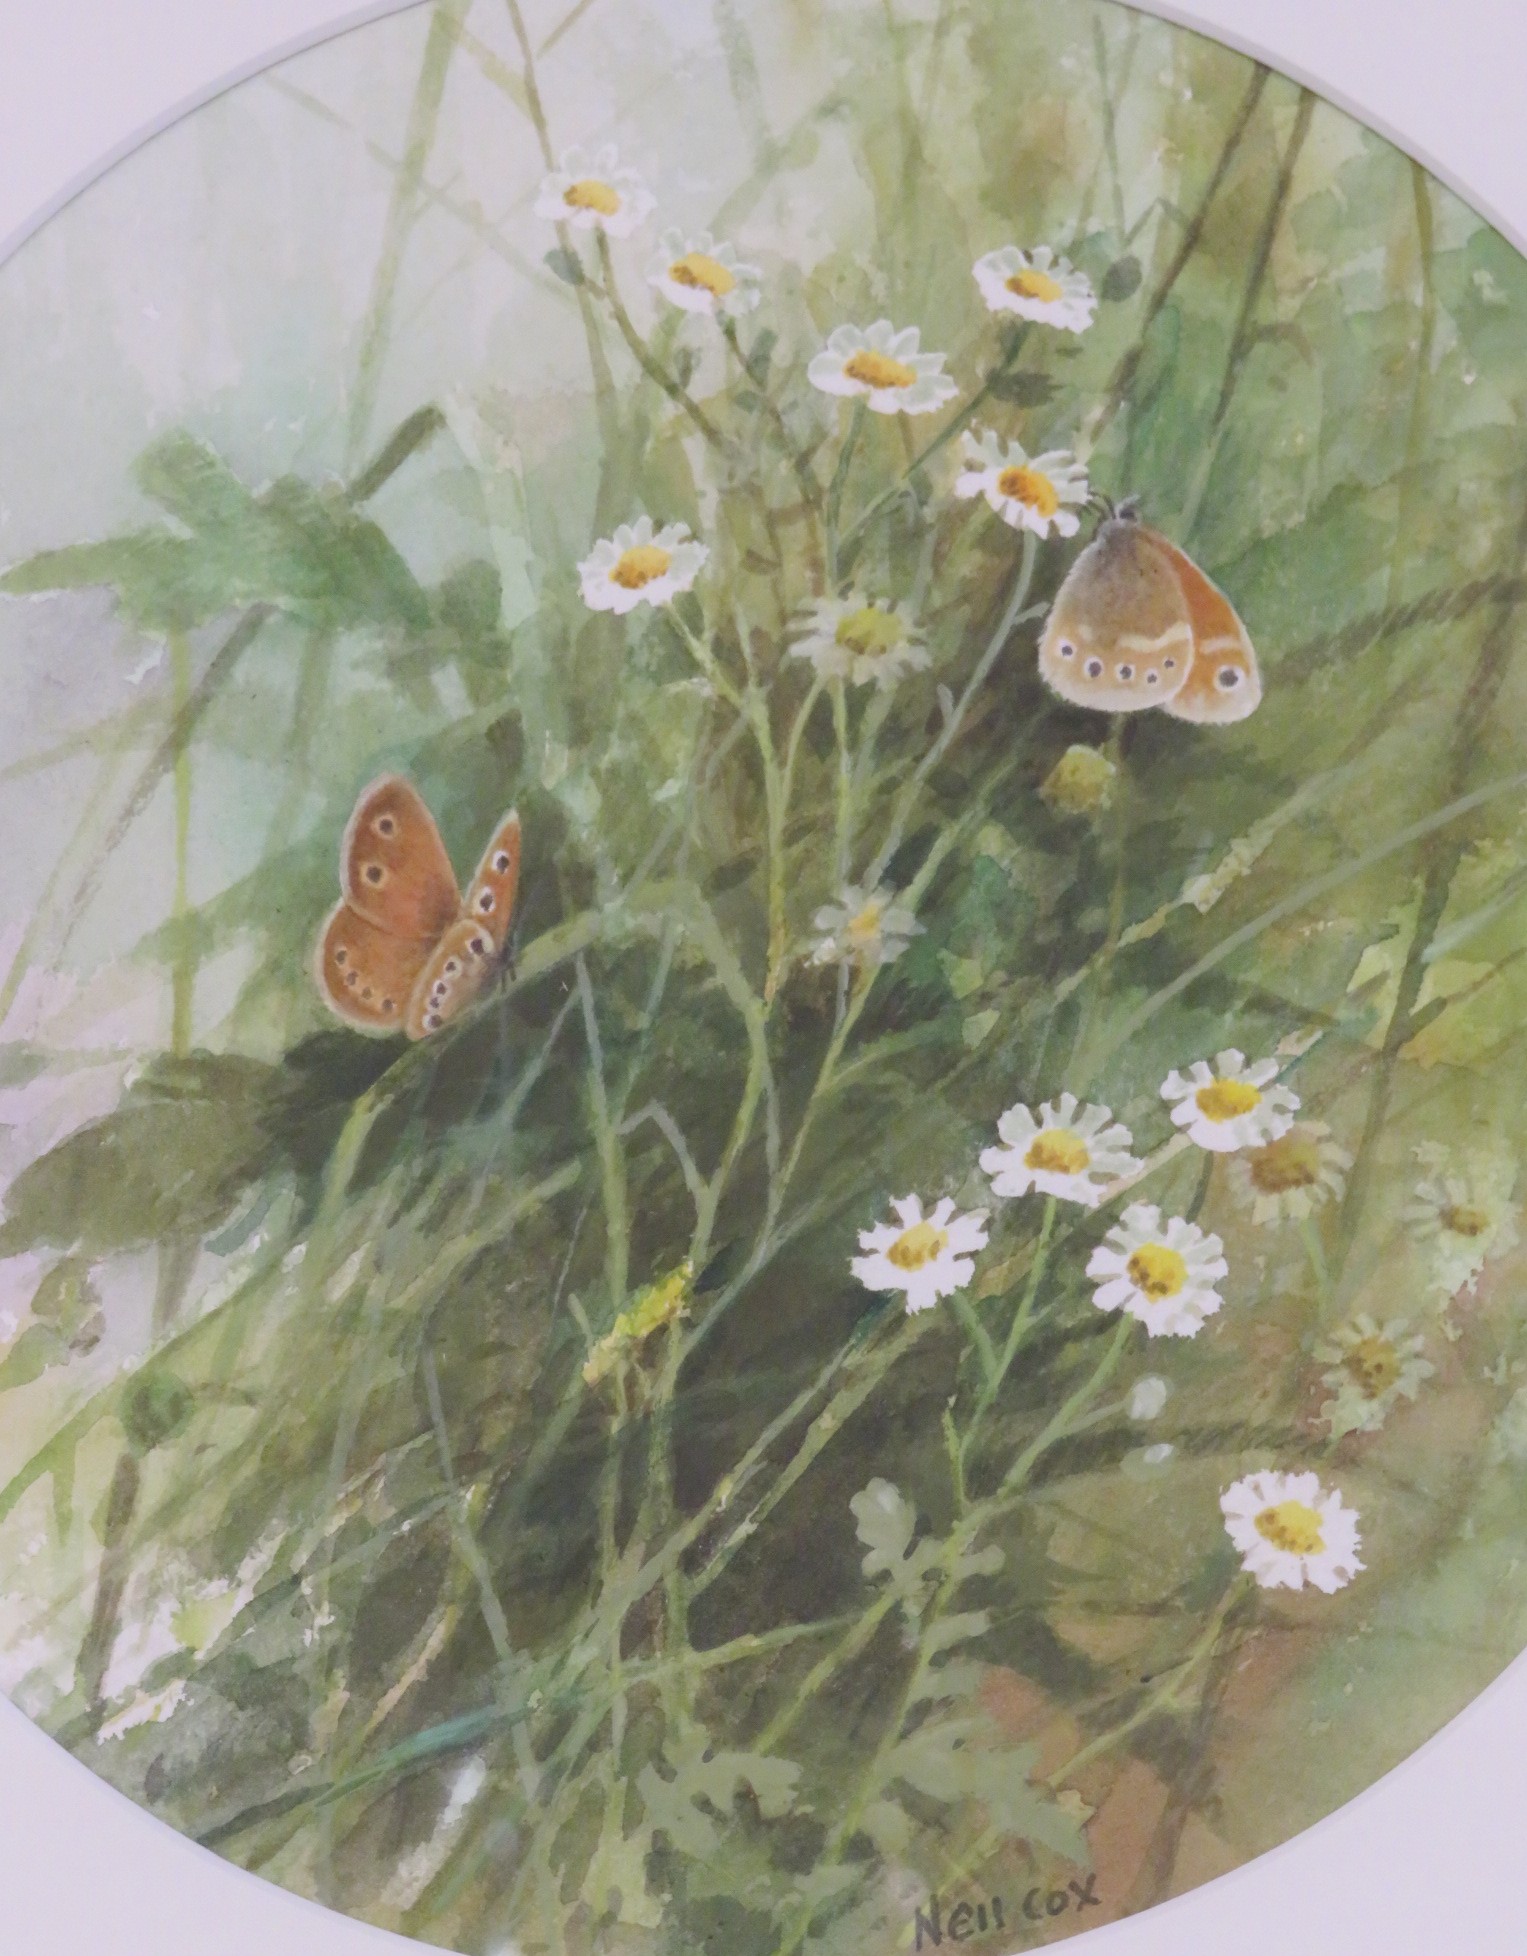 'Large Heaths on Feverfew', watercolour, signed Neil Cox lower right, circular mount, diameter 22cm, - Image 3 of 5